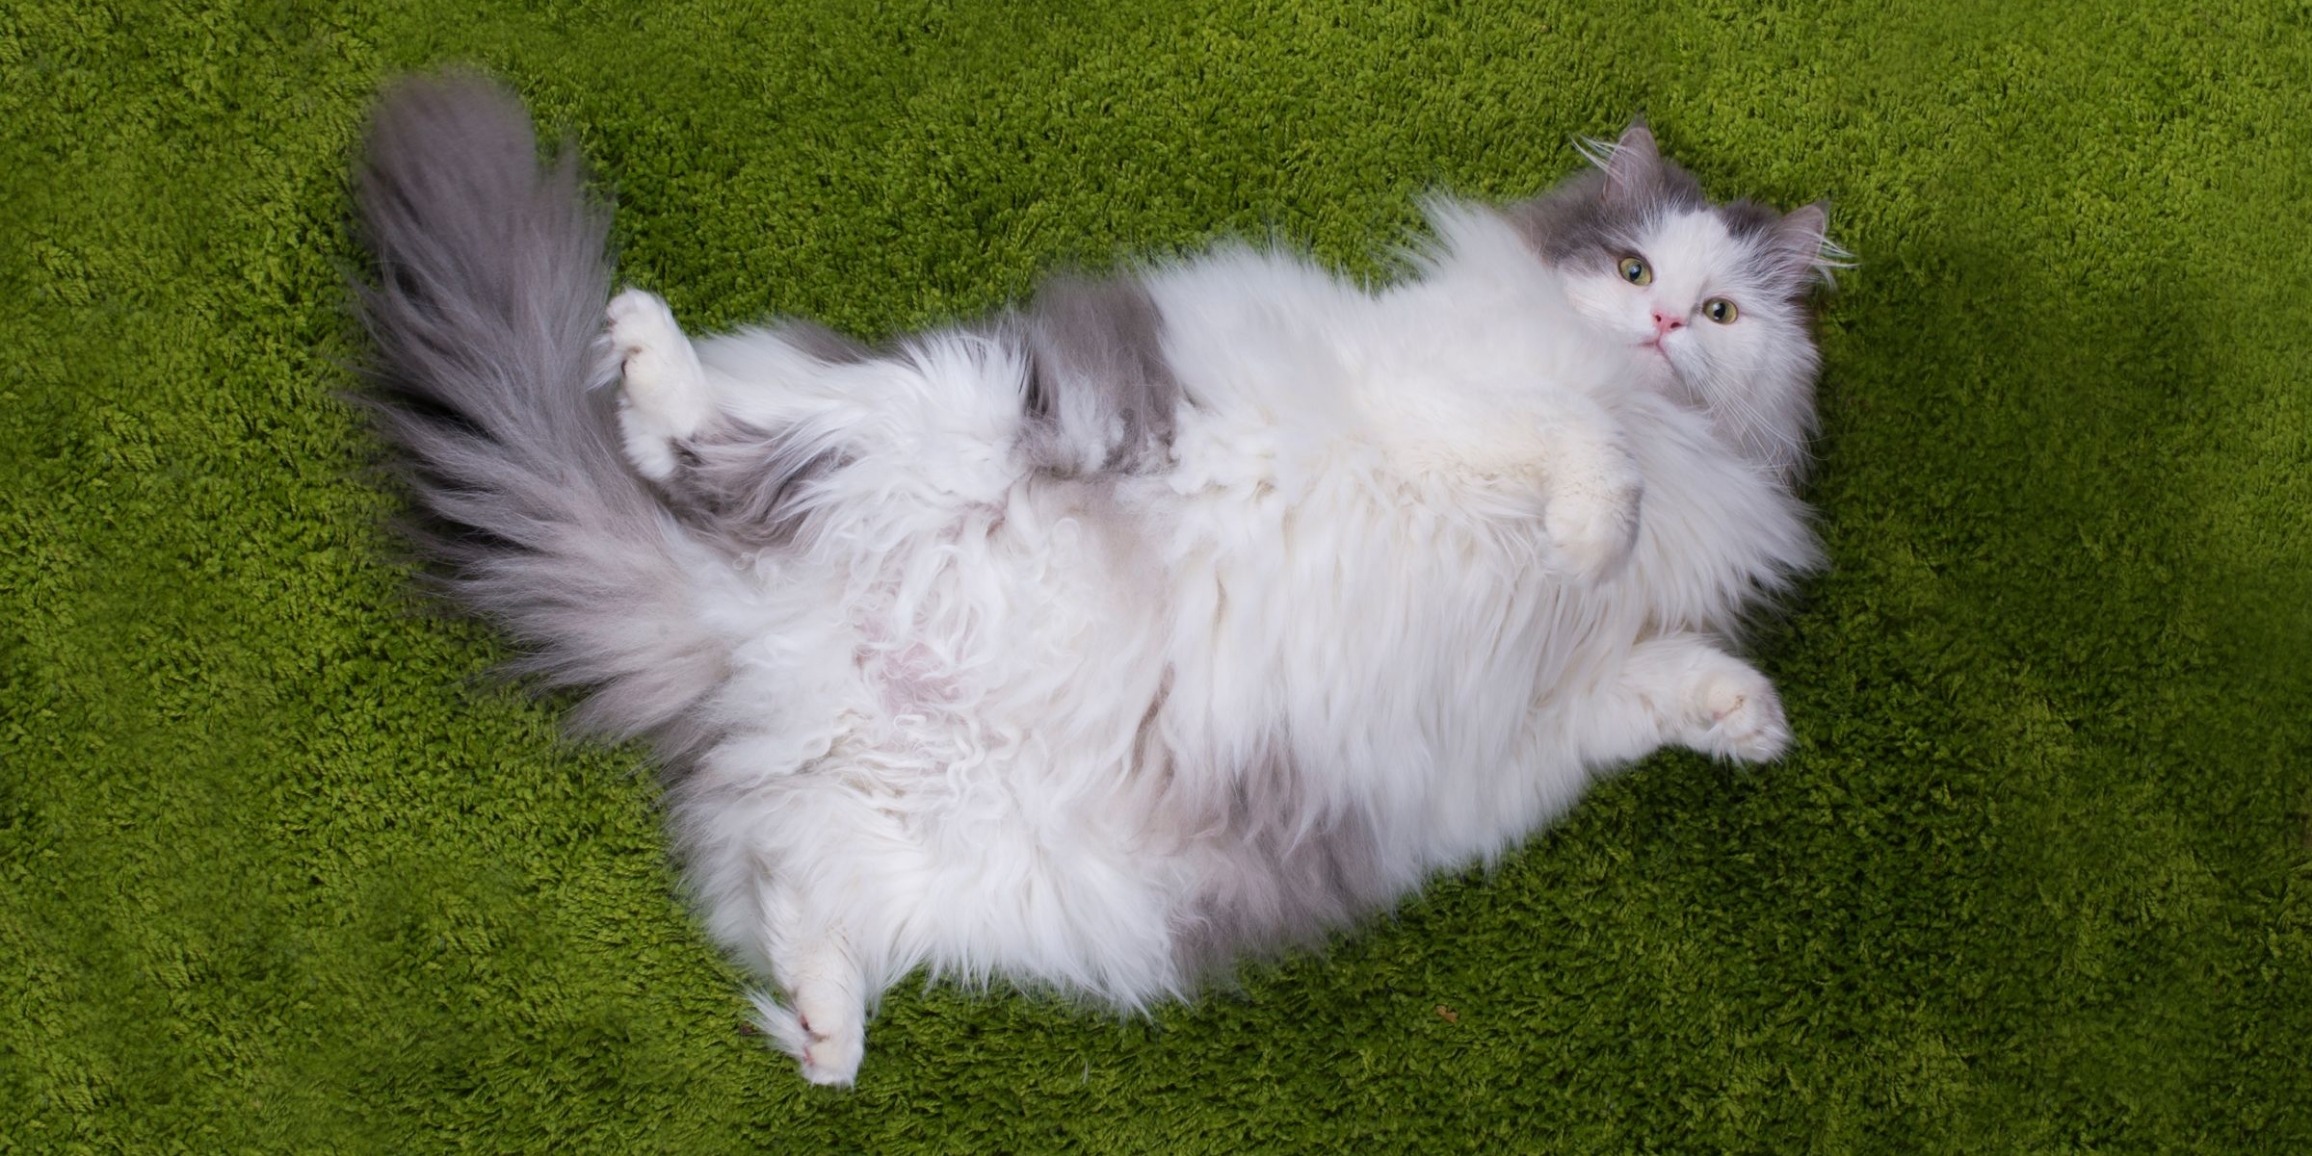 Is It Fat or Fluff?